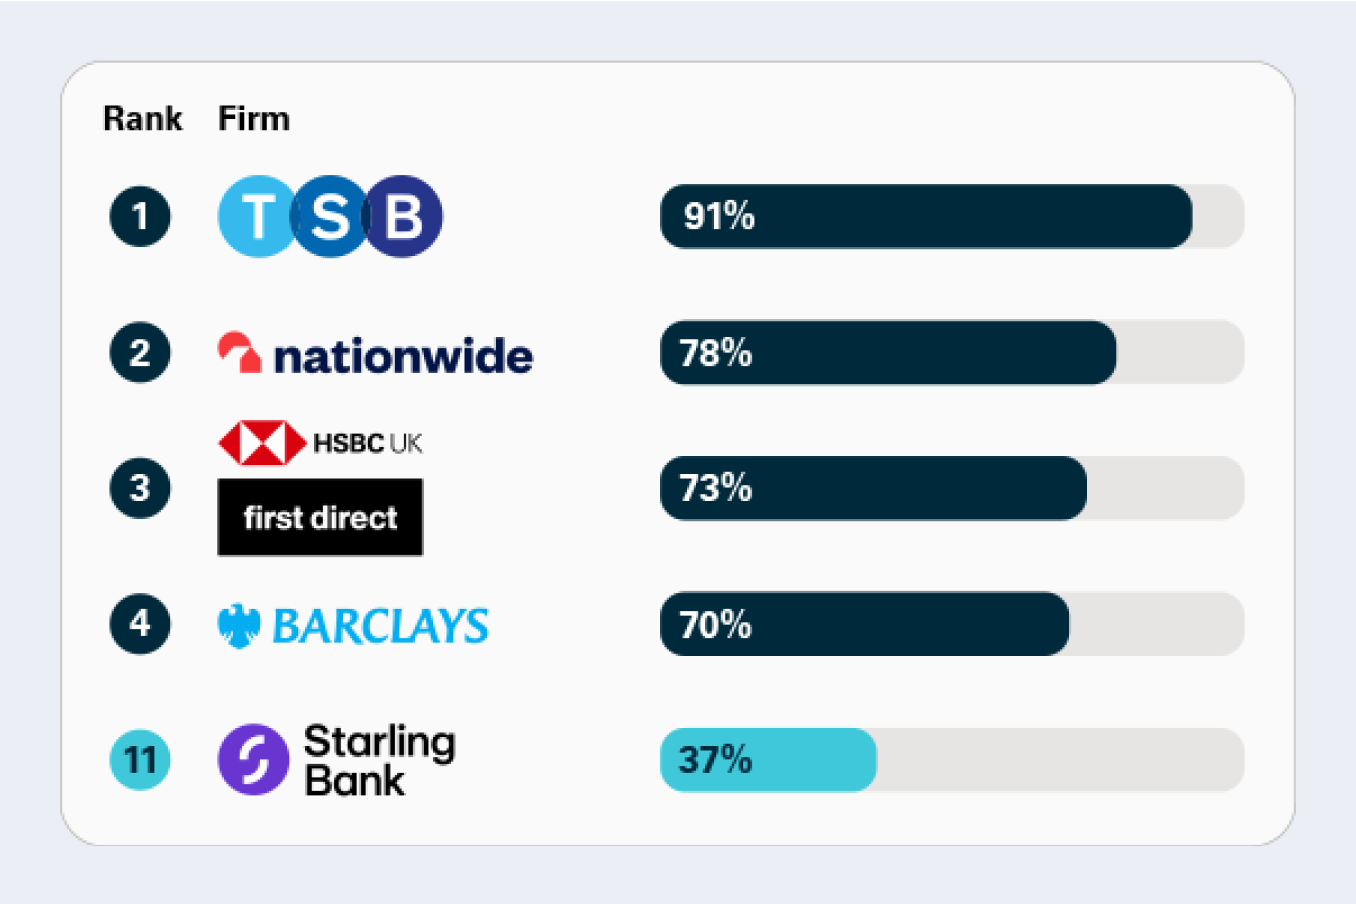 This data shows the proportion of total APP fraud losses that were reimbursed. Higher figure is better. 1. TSB = 91%, 2. Nationwide = 78%, 3.HSBC UK first direct = 73%, 4.Barclays = 70%, 11. Starling Bank = 37%